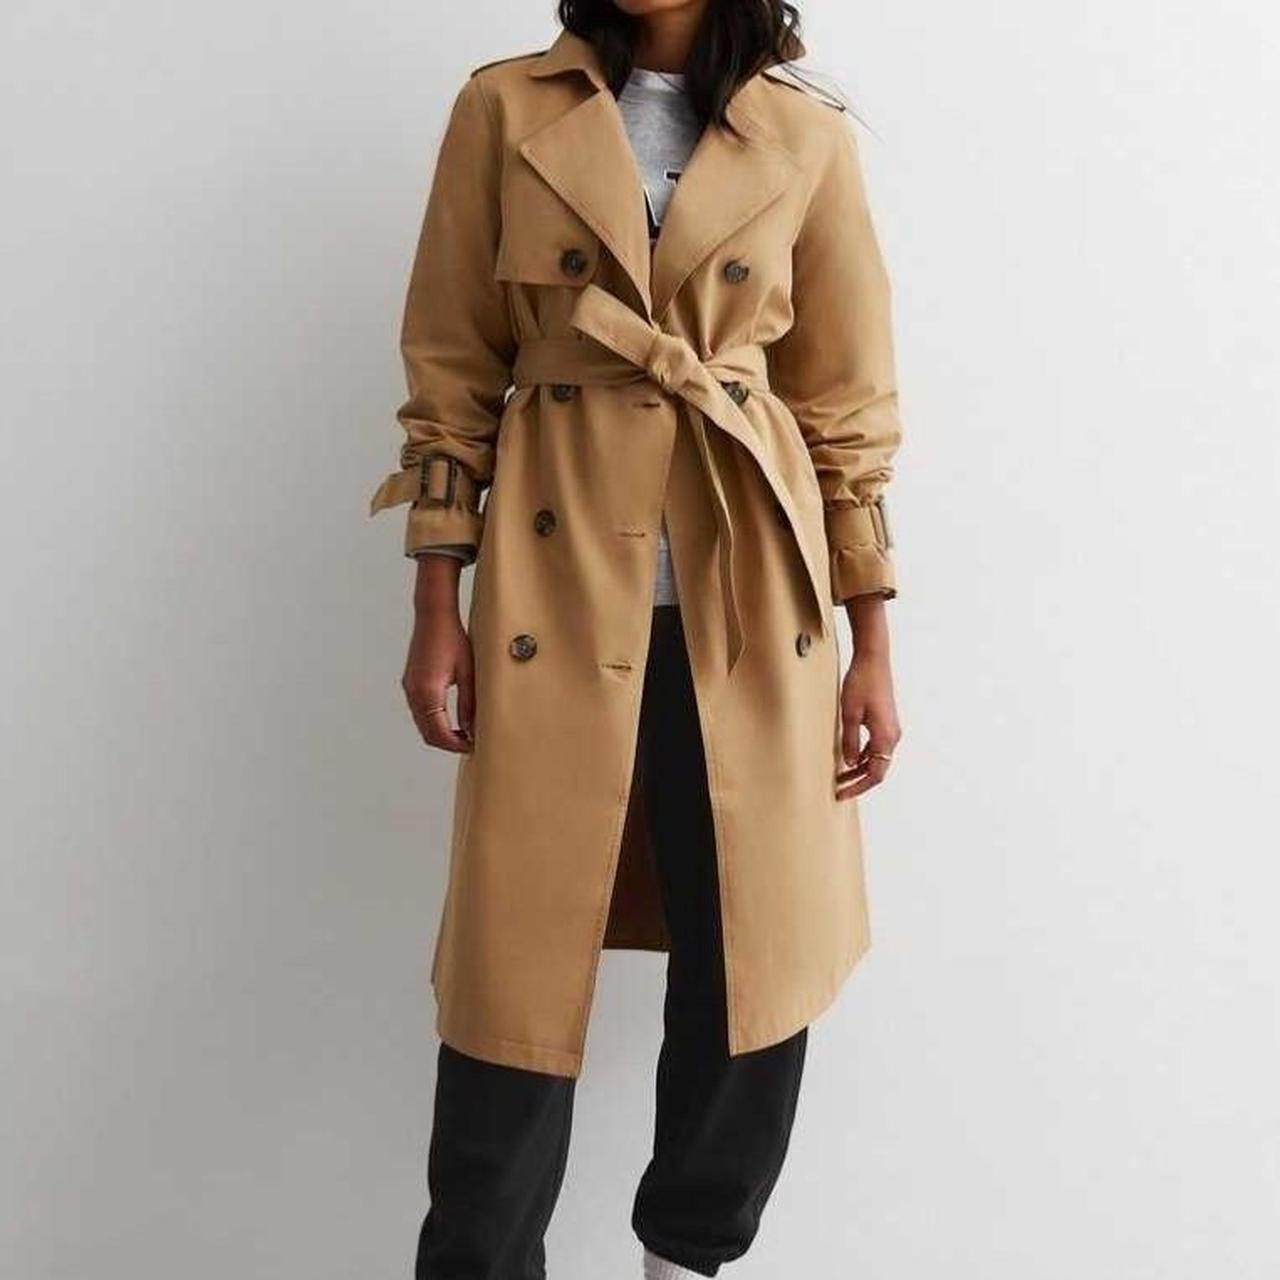 New look trench coat size 18 still has tags on never... - Depop